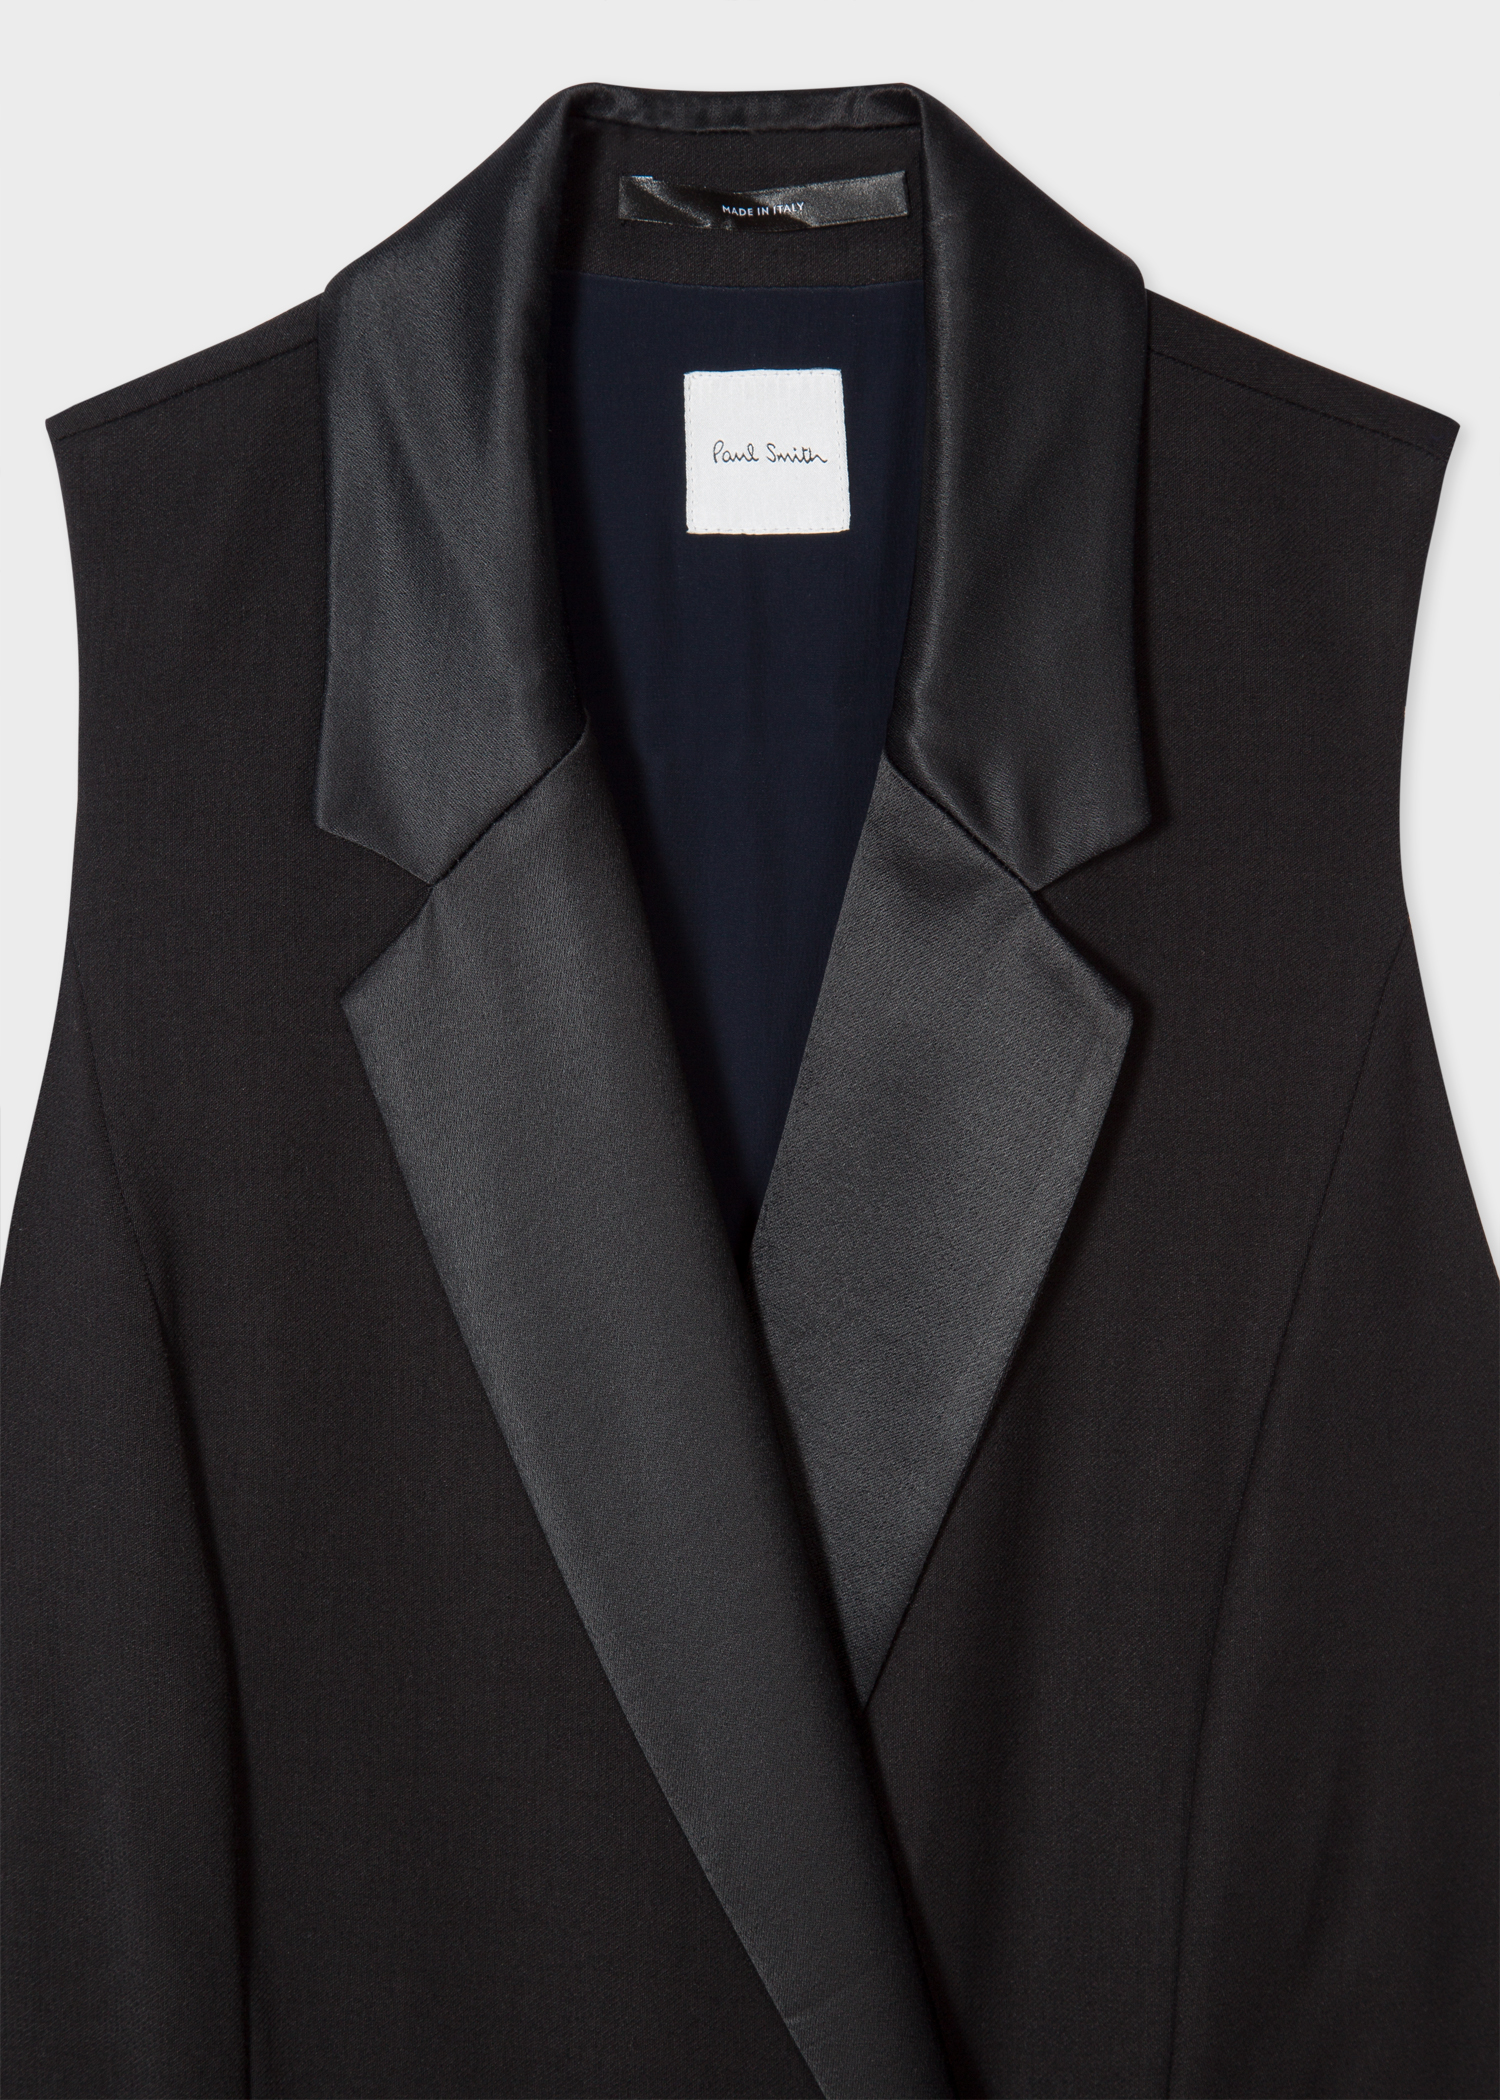 Lapel View - Women's Black Tuxedo Double-Breasted Dress With Satin Detail Paul Smith